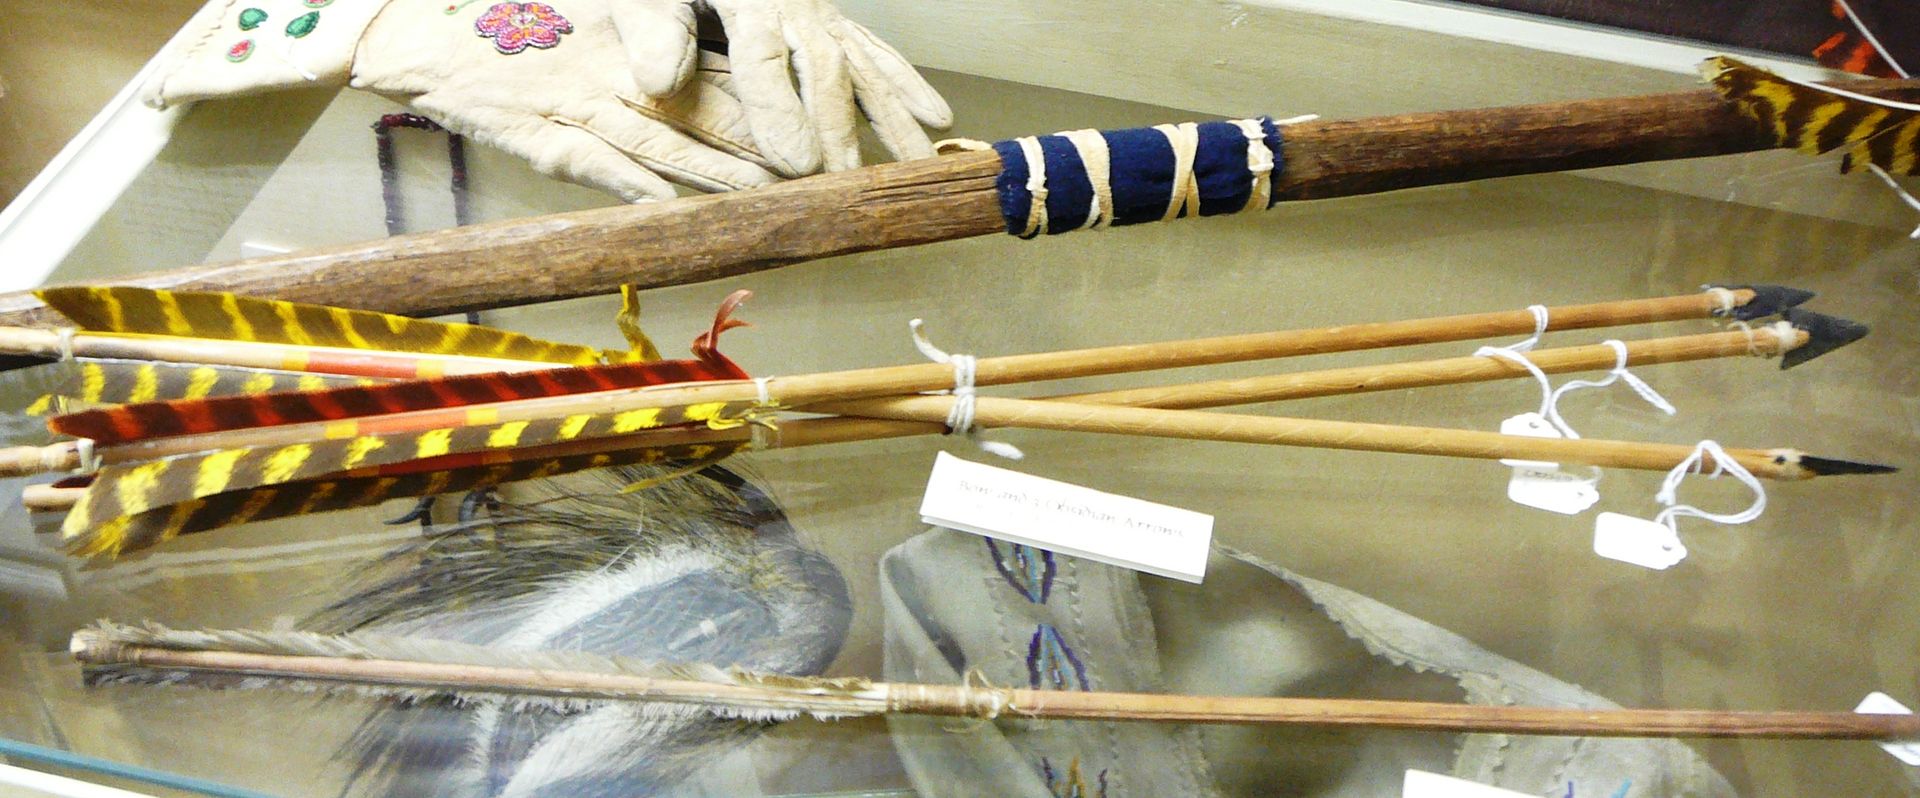 What types of tools and weapons did the Ojibwa Indians use?